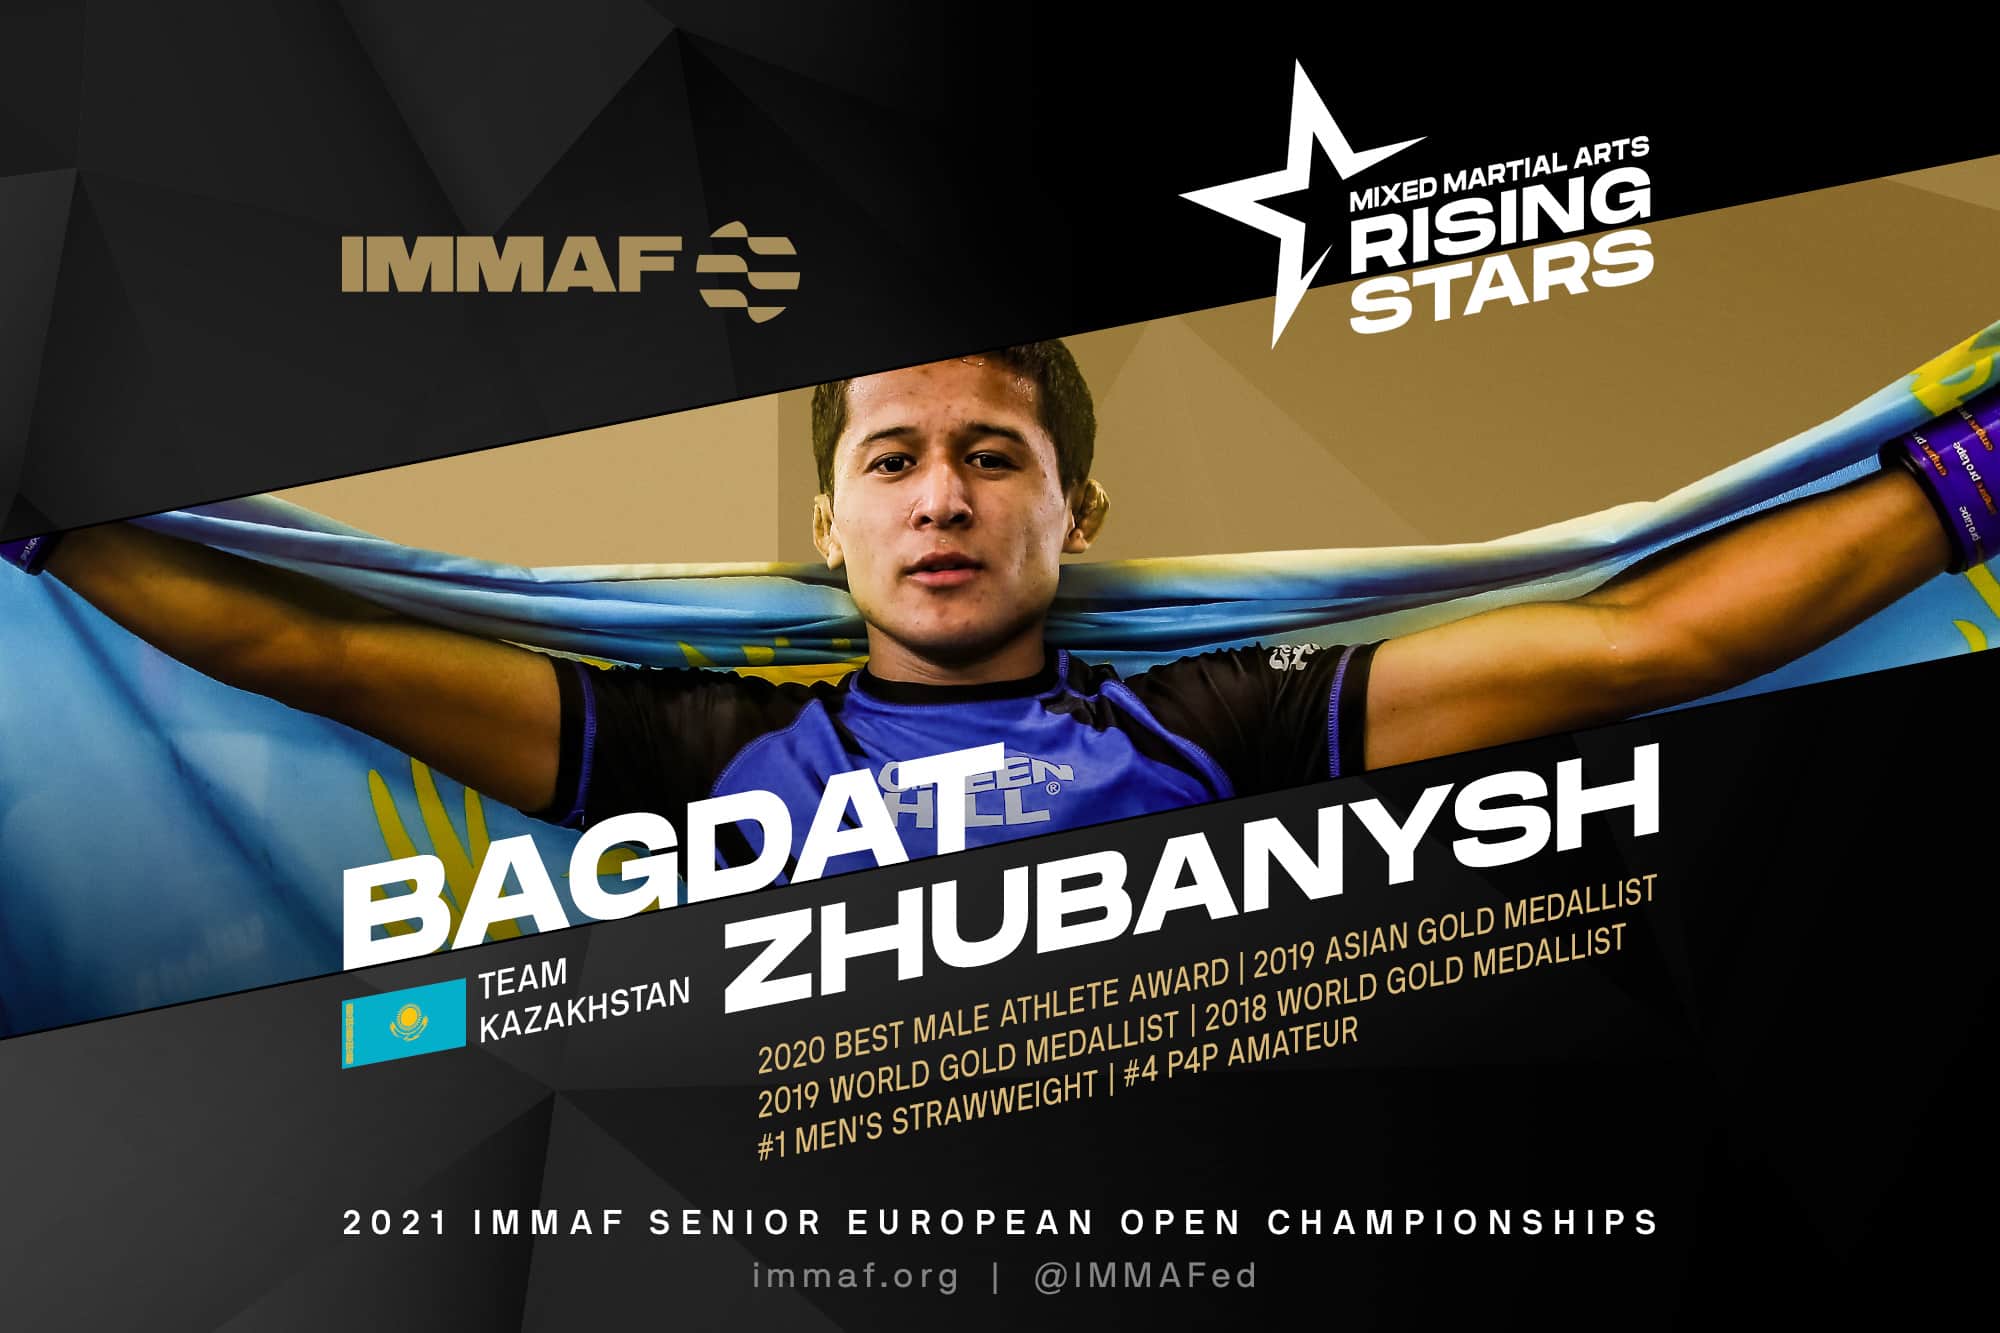 Will the Euros prime Rising Star Bagdat for his 3rd World Gold?